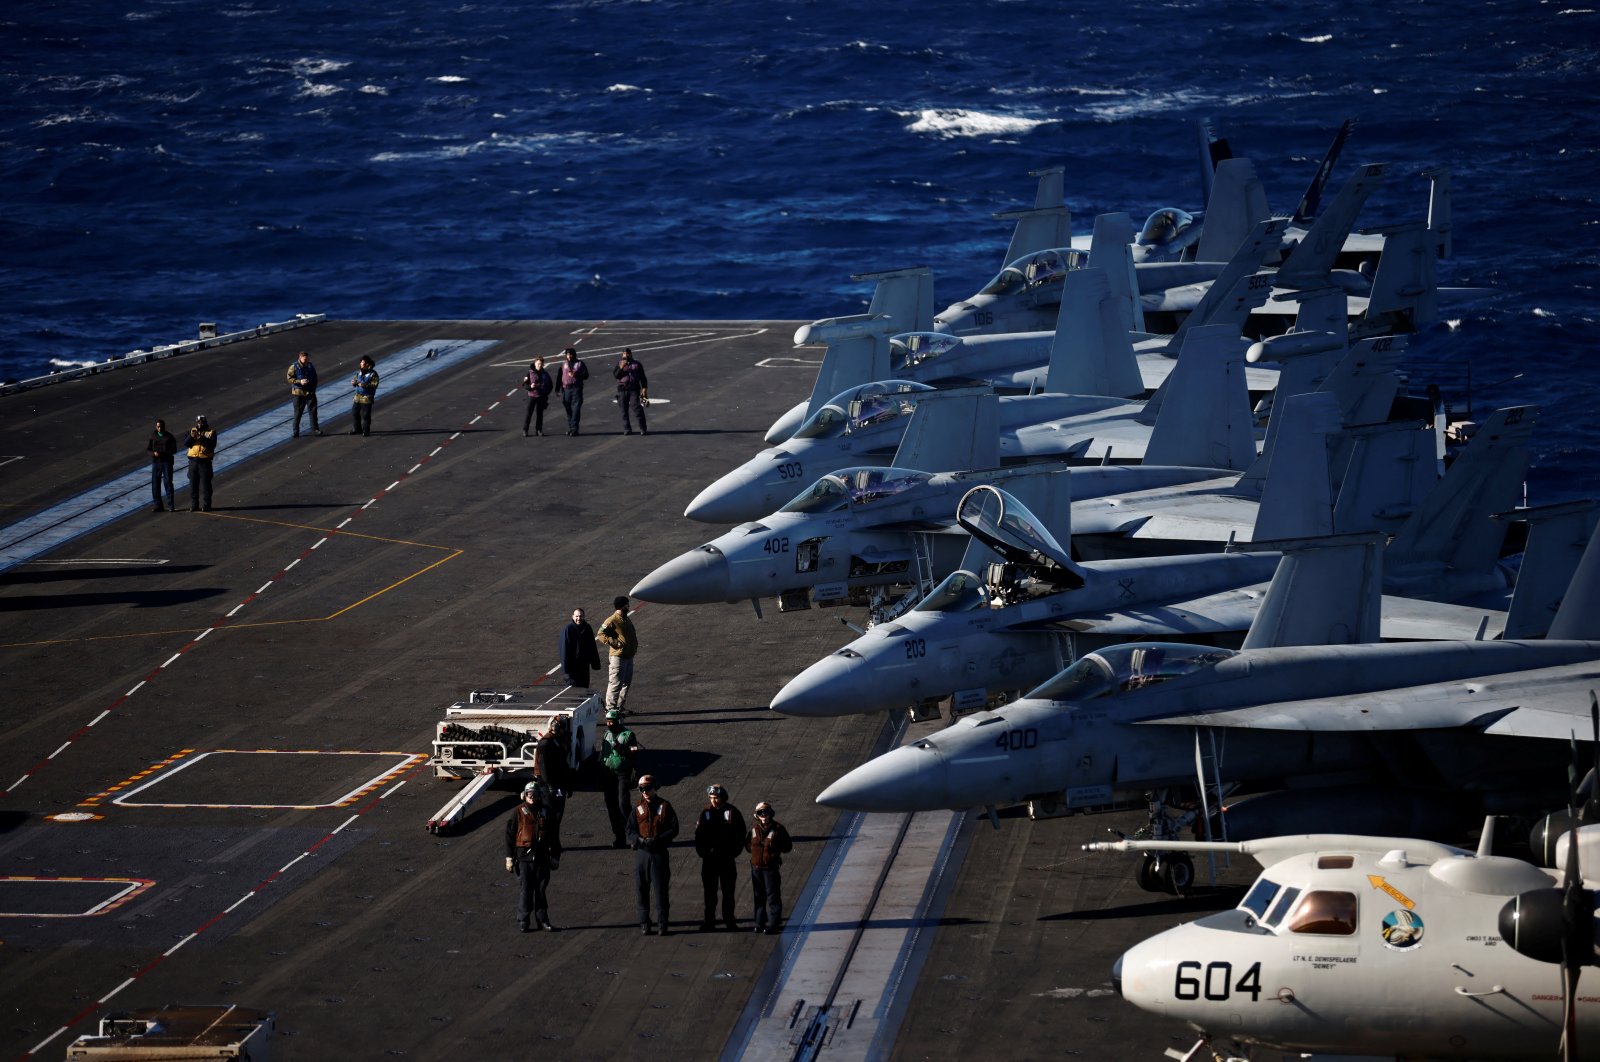 U.S. Navy sailors operate onboard aircraft carrier USS Harry S. Truman, in the Adriatic Sea, Feb. 2, 2022. (Reuters Photo)